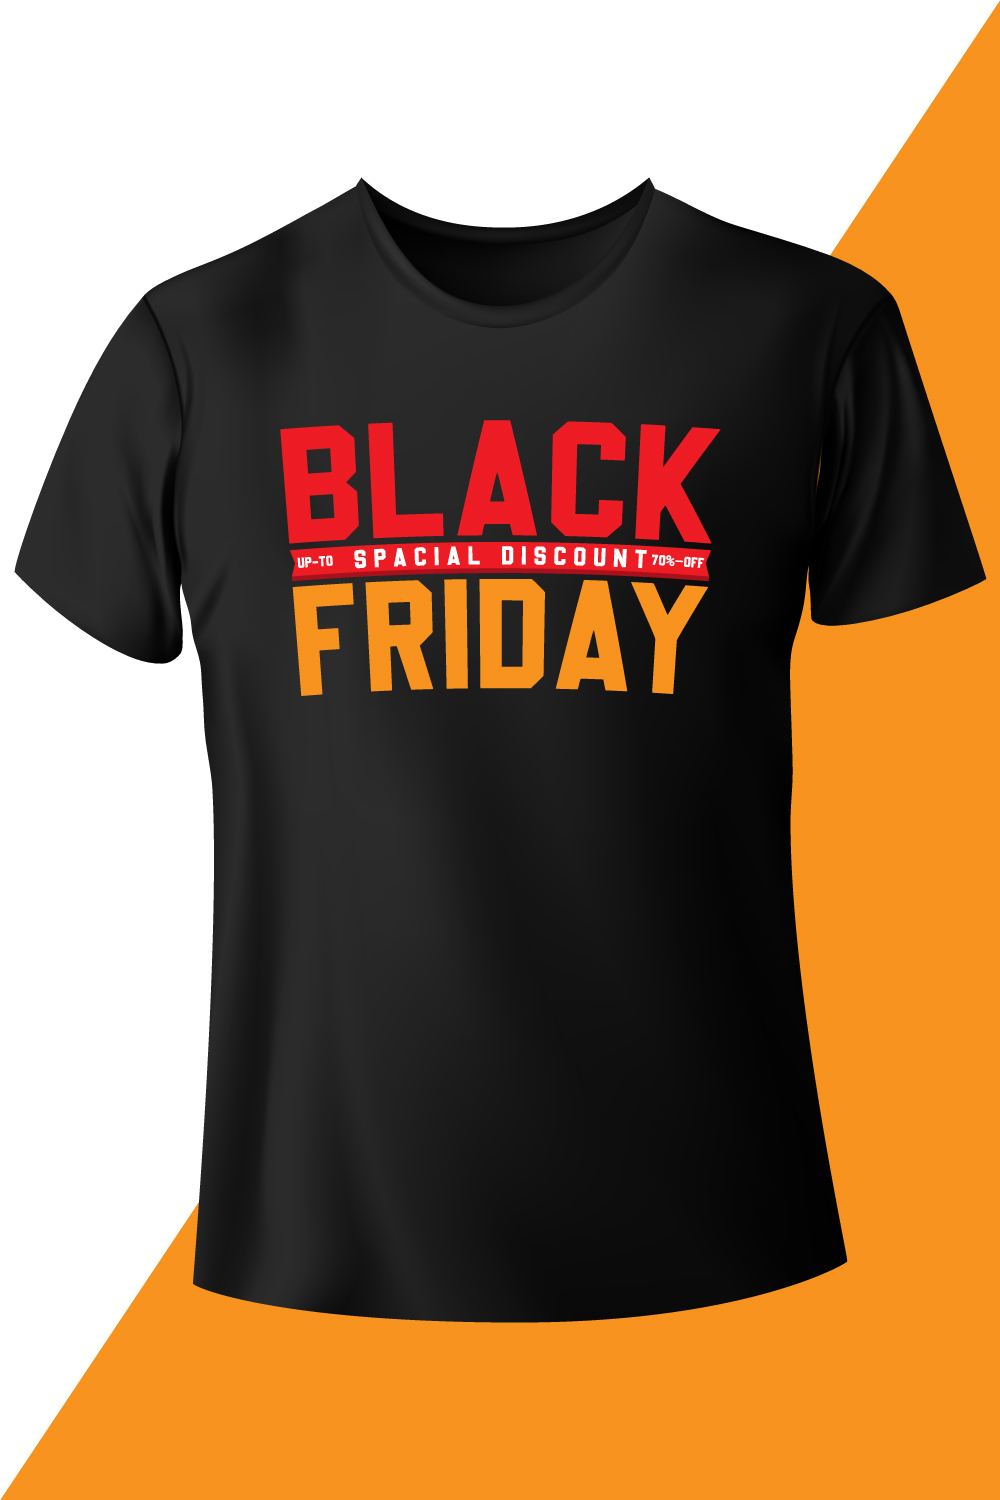 Image of a black t-shirt with an amazing inscription Black Friday.